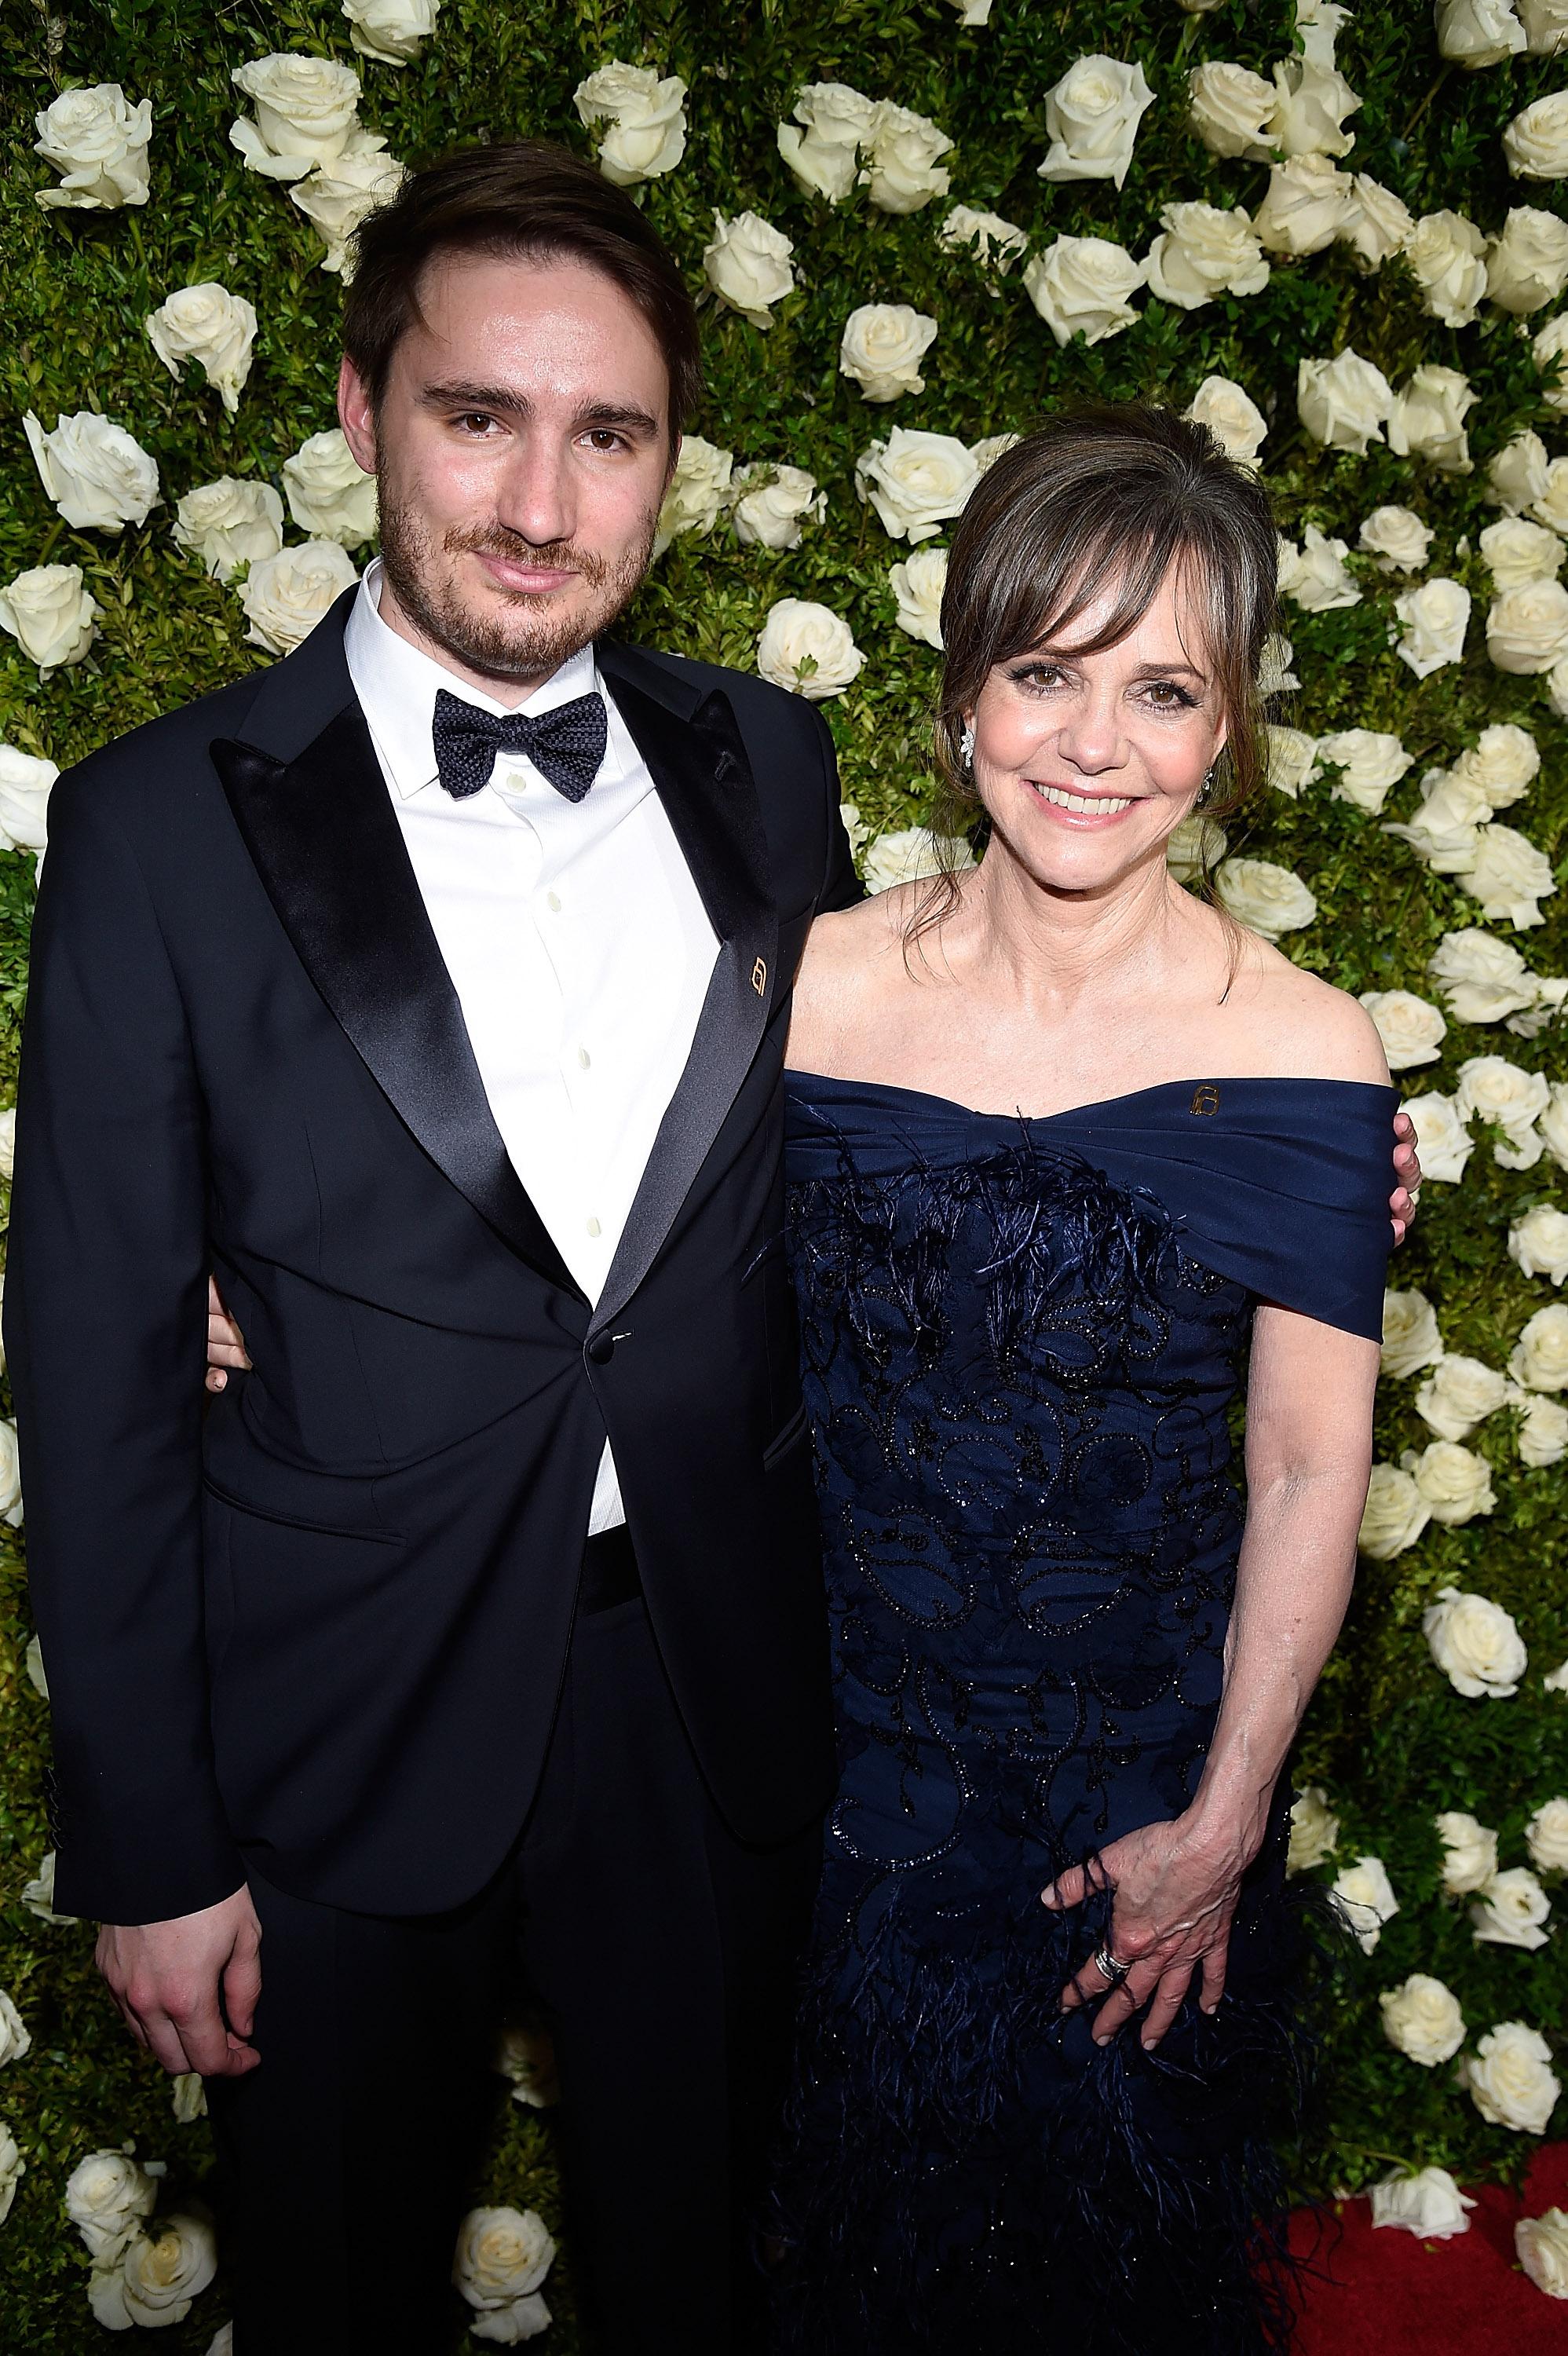 Samuel Greisman and Sally Field at the Tony Awards in New York City on June 11, 2017 | Source: Getty Images